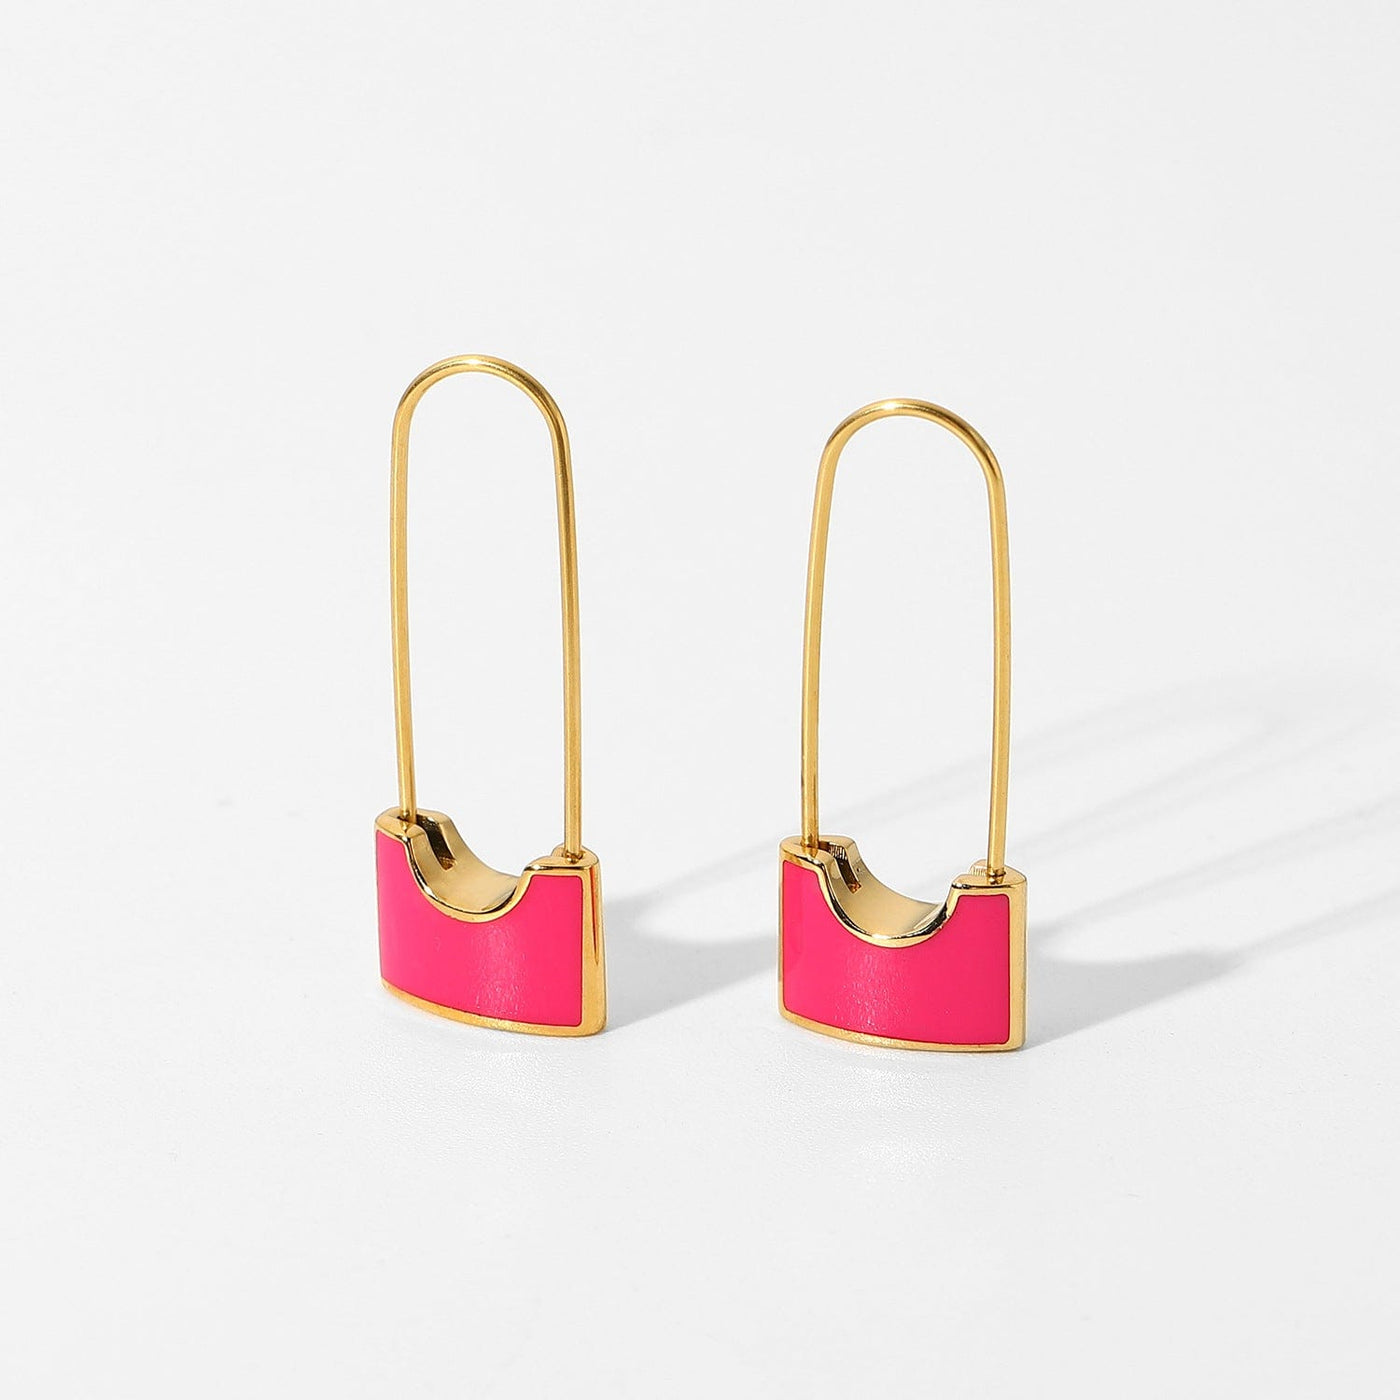 nolo lock me love me stainless steel 18k gold plated candy colored hot pink safety pin lock designed colorful hoop earrings 